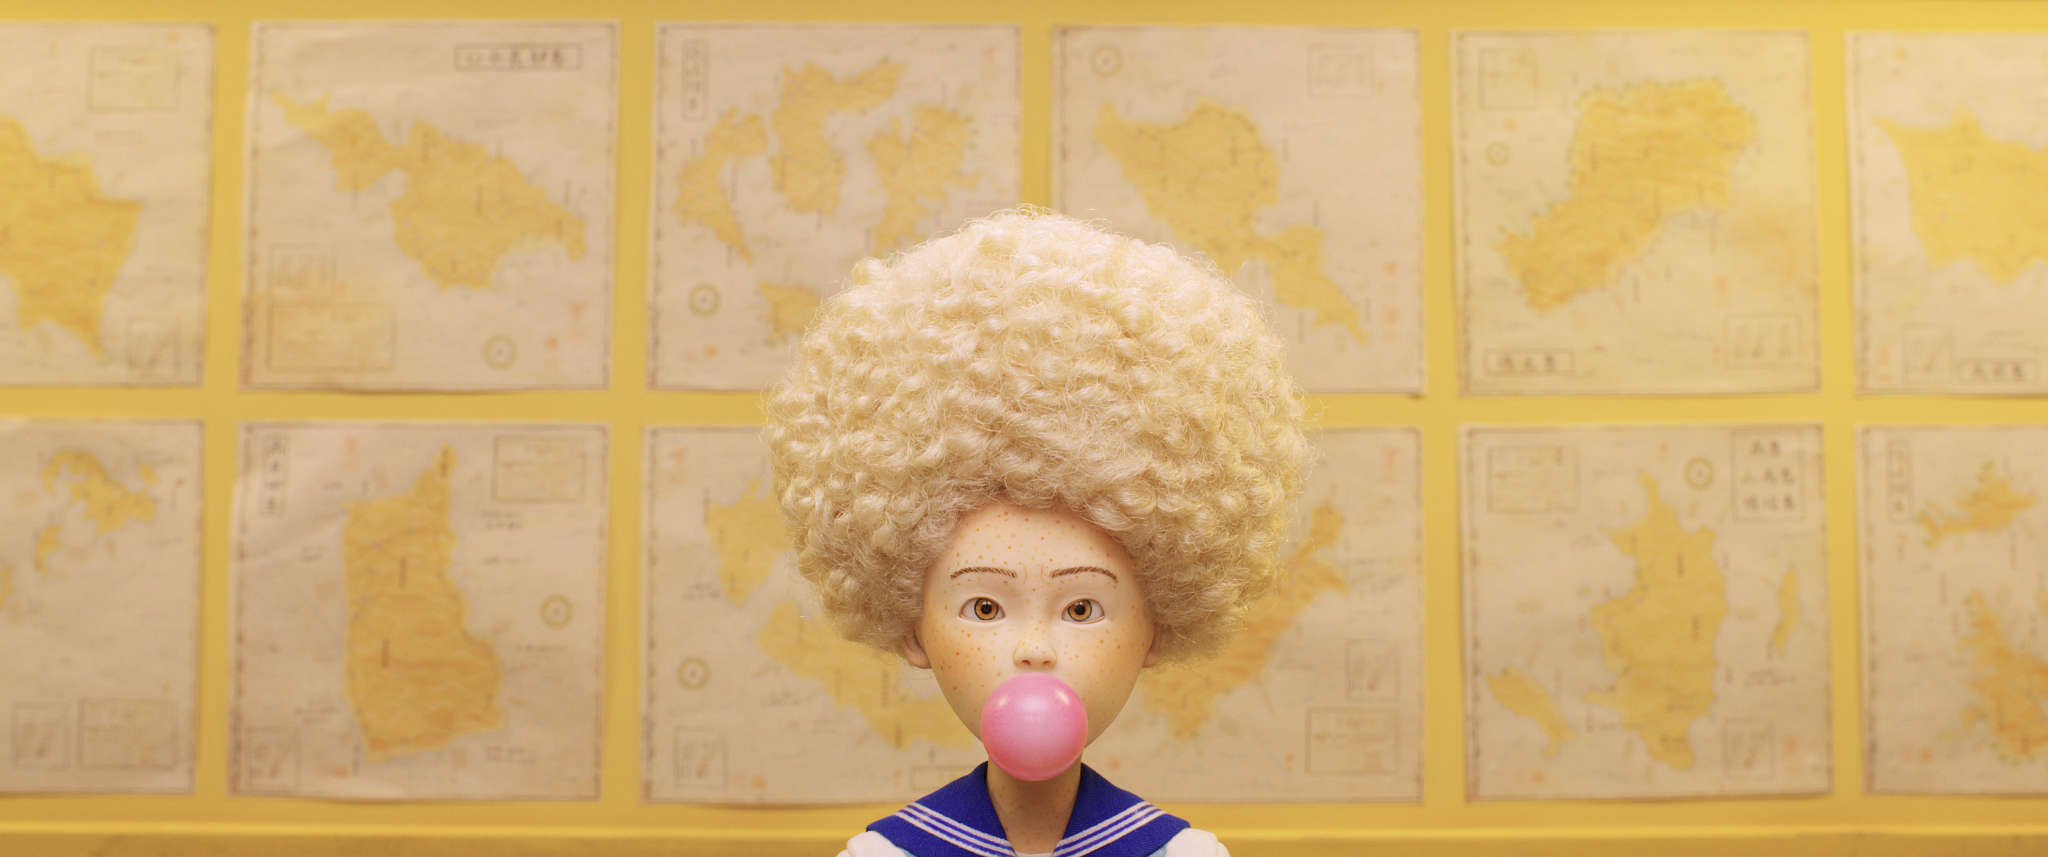 Greta Gerwig's character 'Tracy Walker' in Isle of Dogs. (Photo Courtesy of Fox Searchlight Pictures)